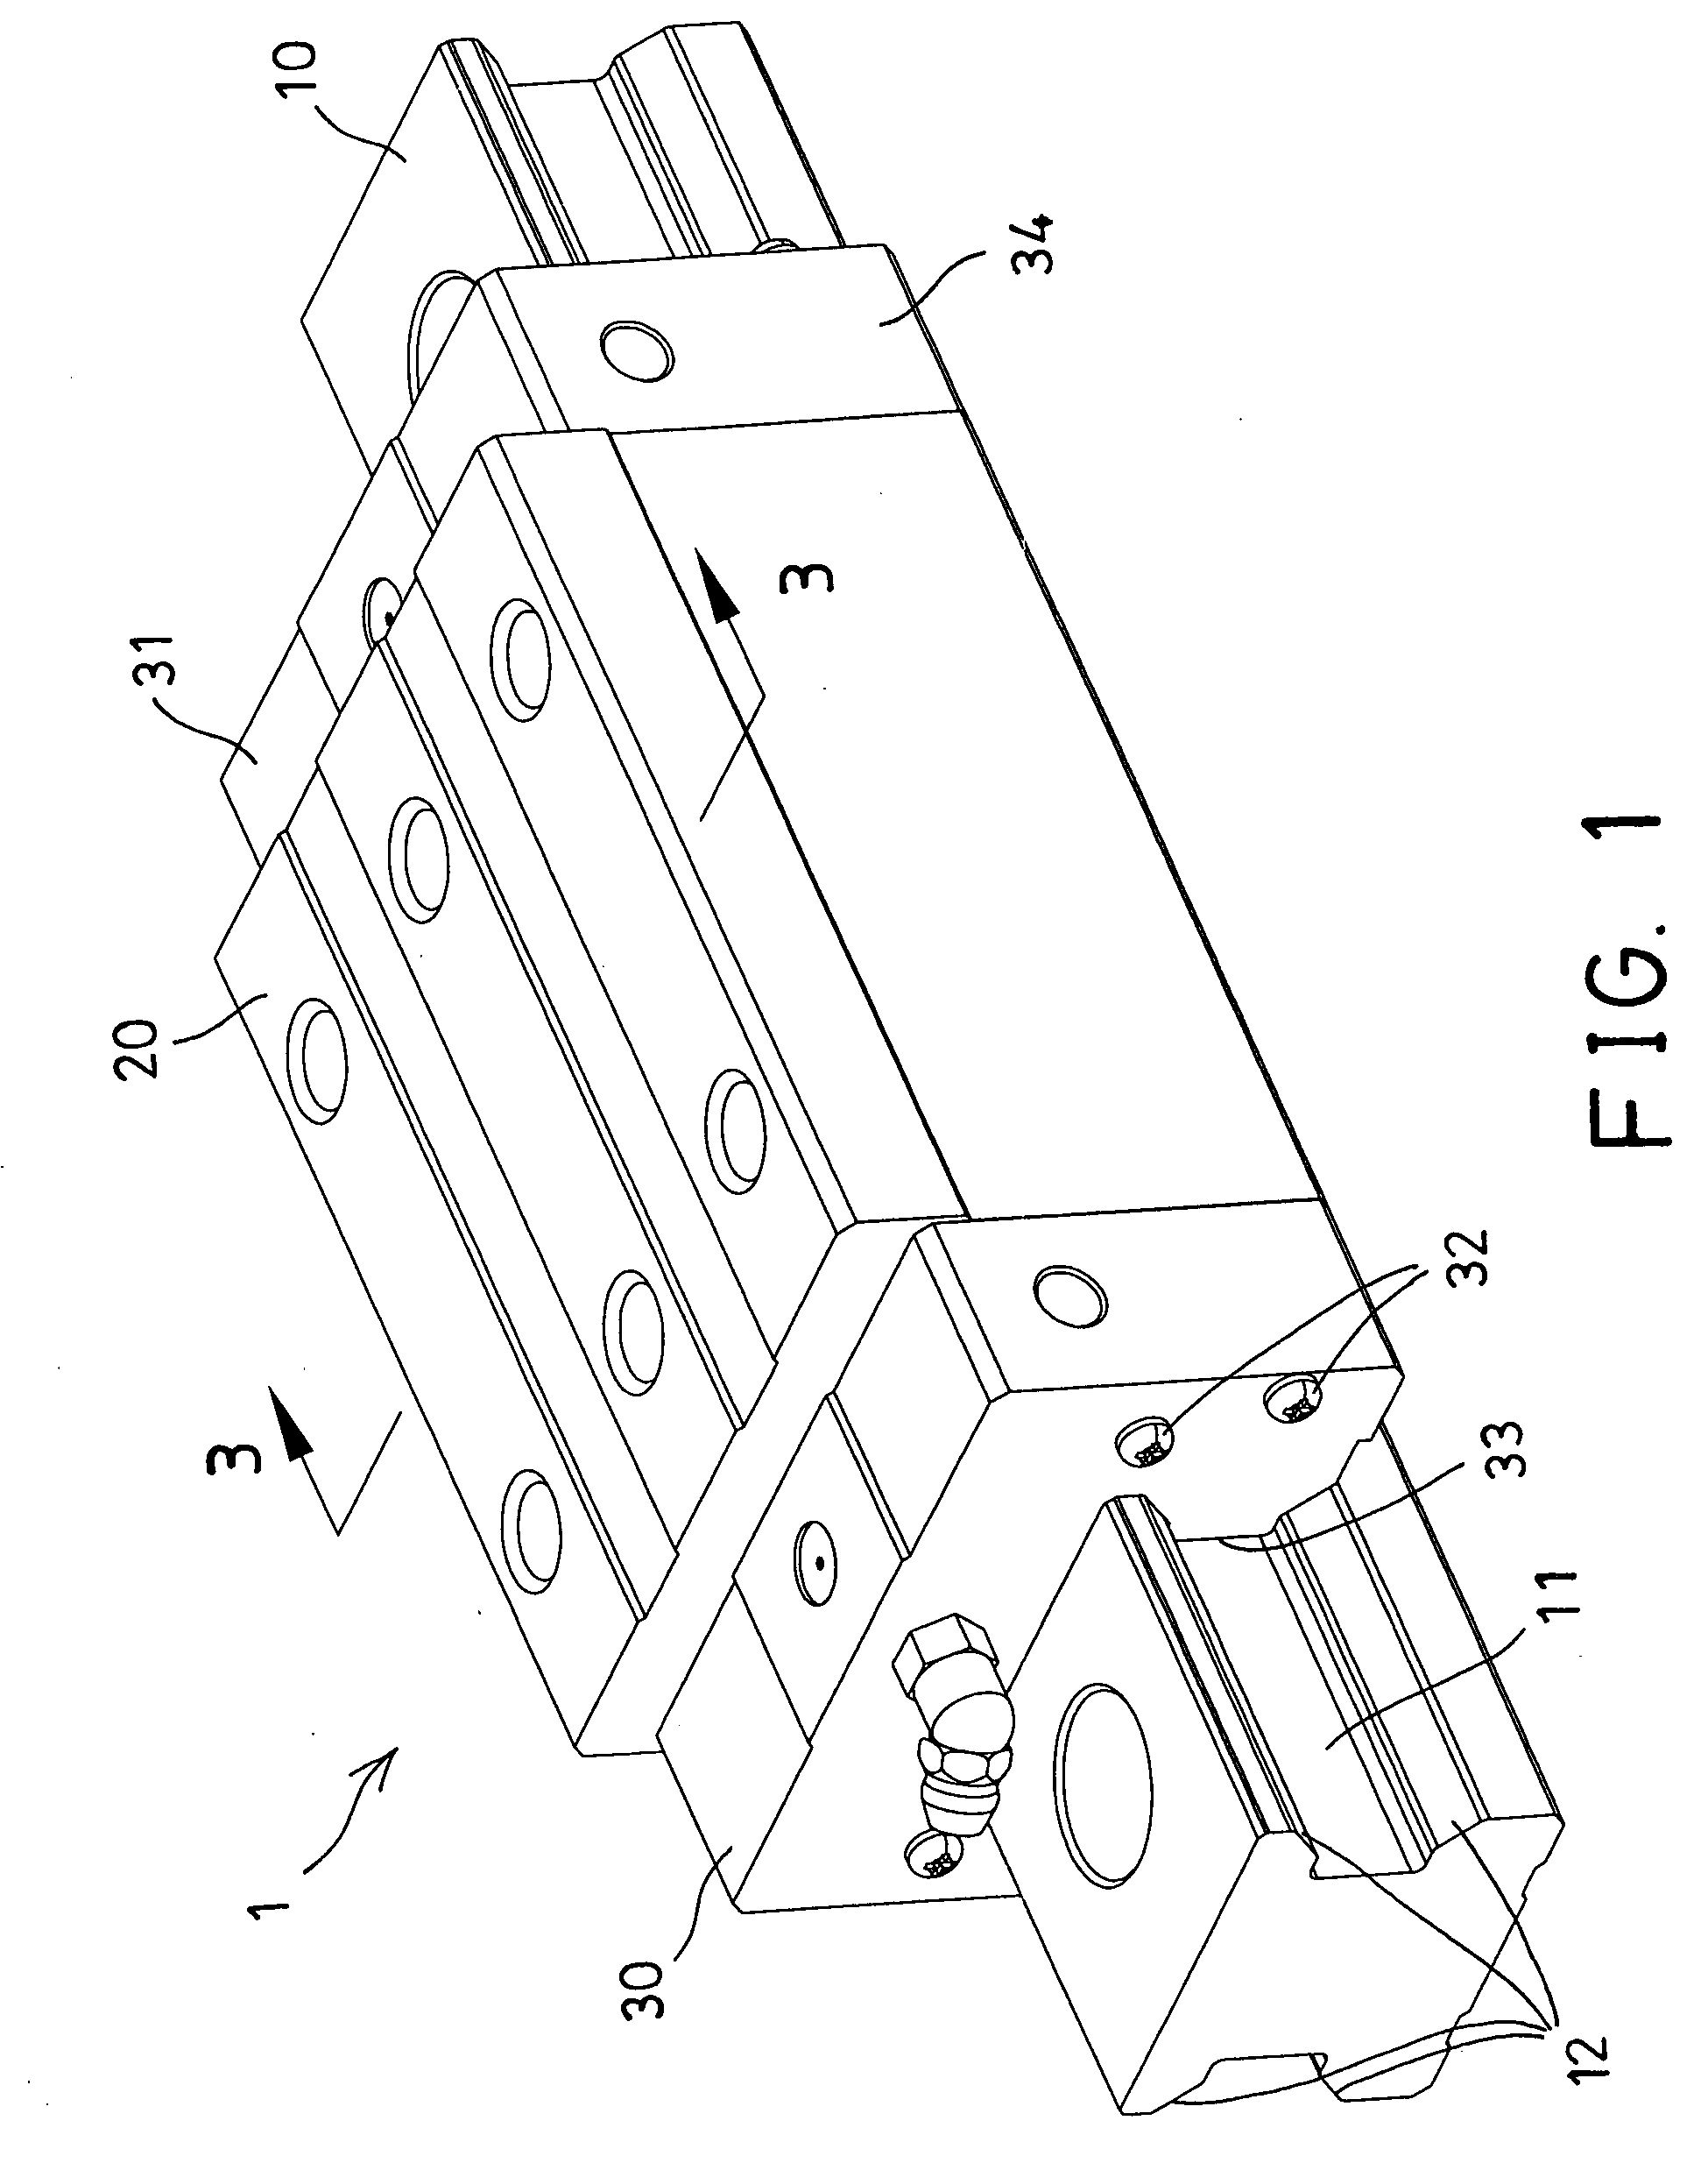 Linear motion guide apparatus